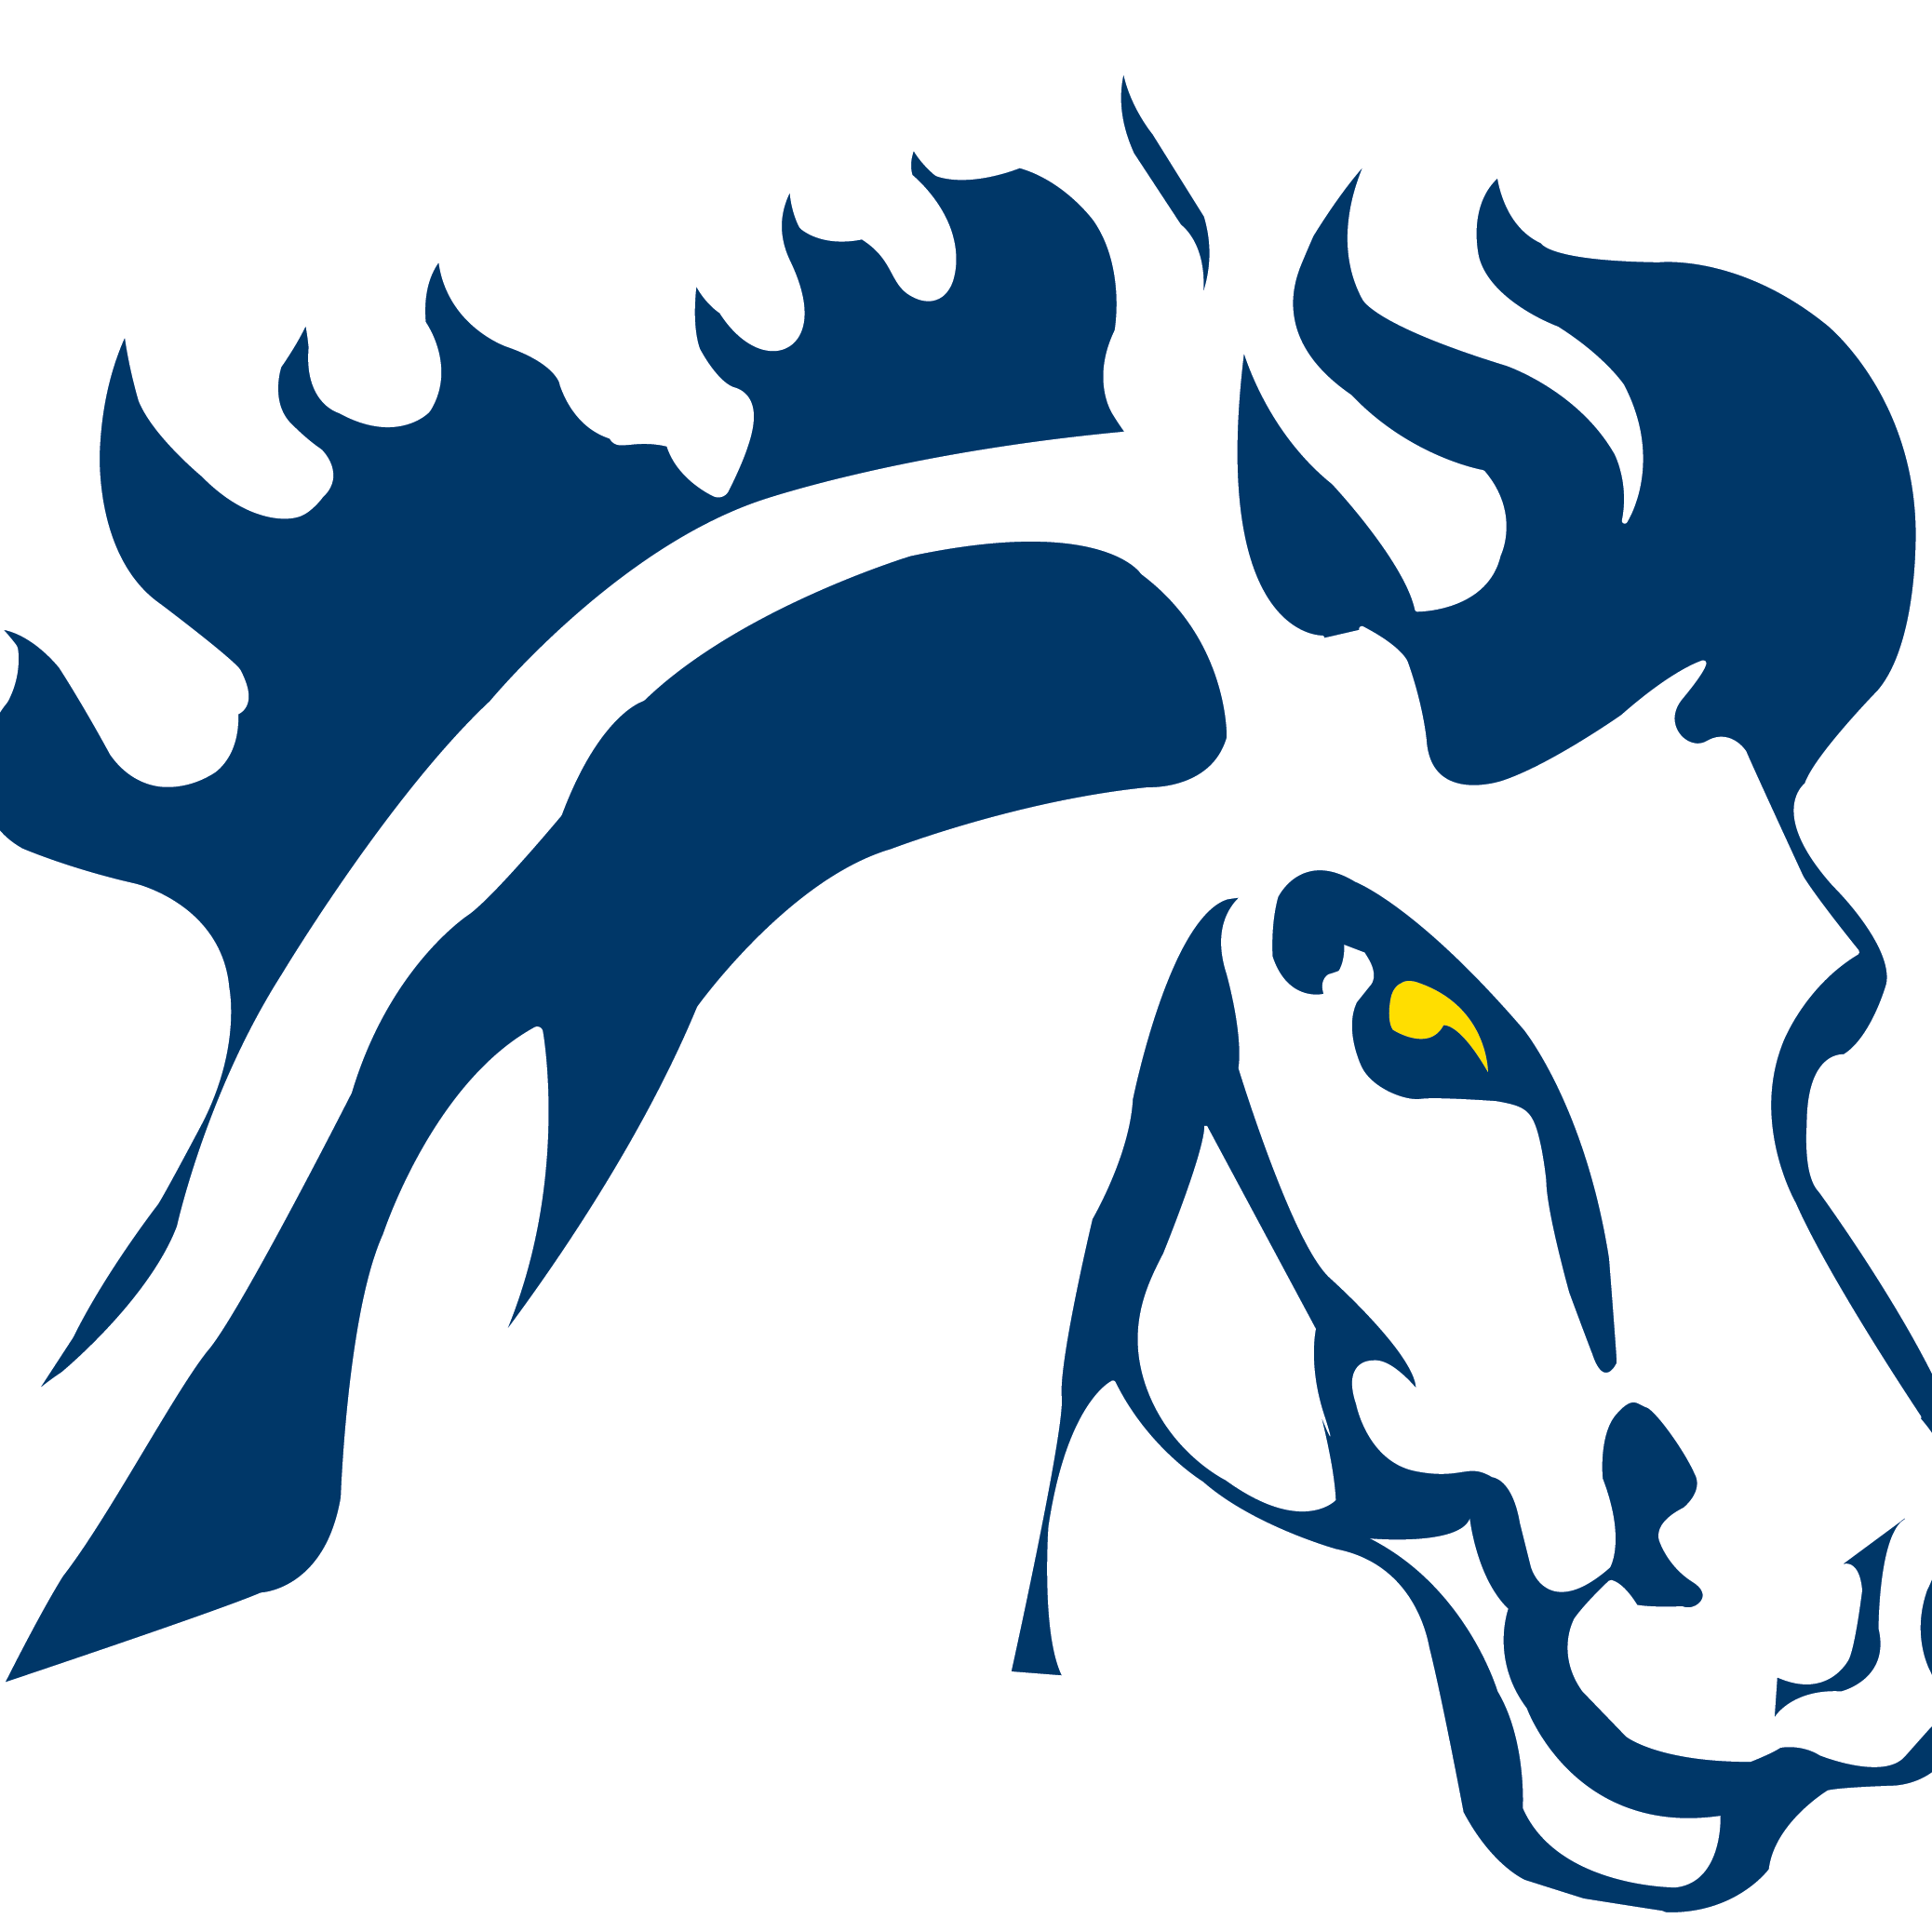 College Basketball Conference & Regional Tournament - Mount Mercy Mustangs Logo (2076x2076)